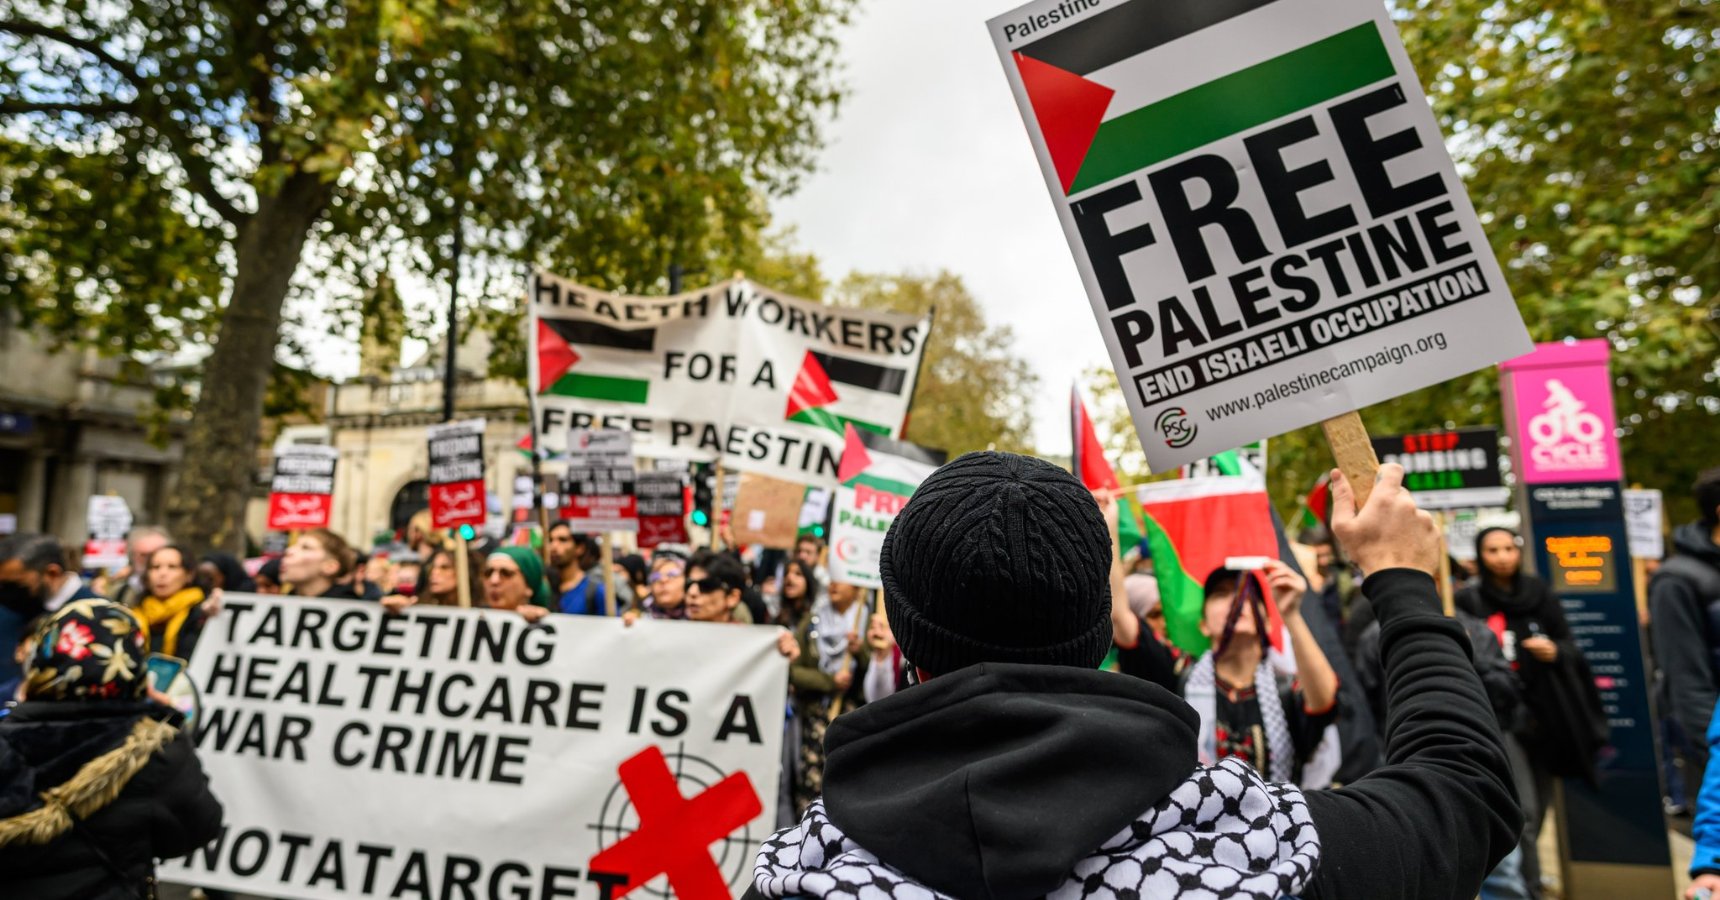 Health workers join the October 28th London march for Palestine, with banners reading 'Targeting Healthcare is a War Crime', and 'Health Workers for a Free Palestine'